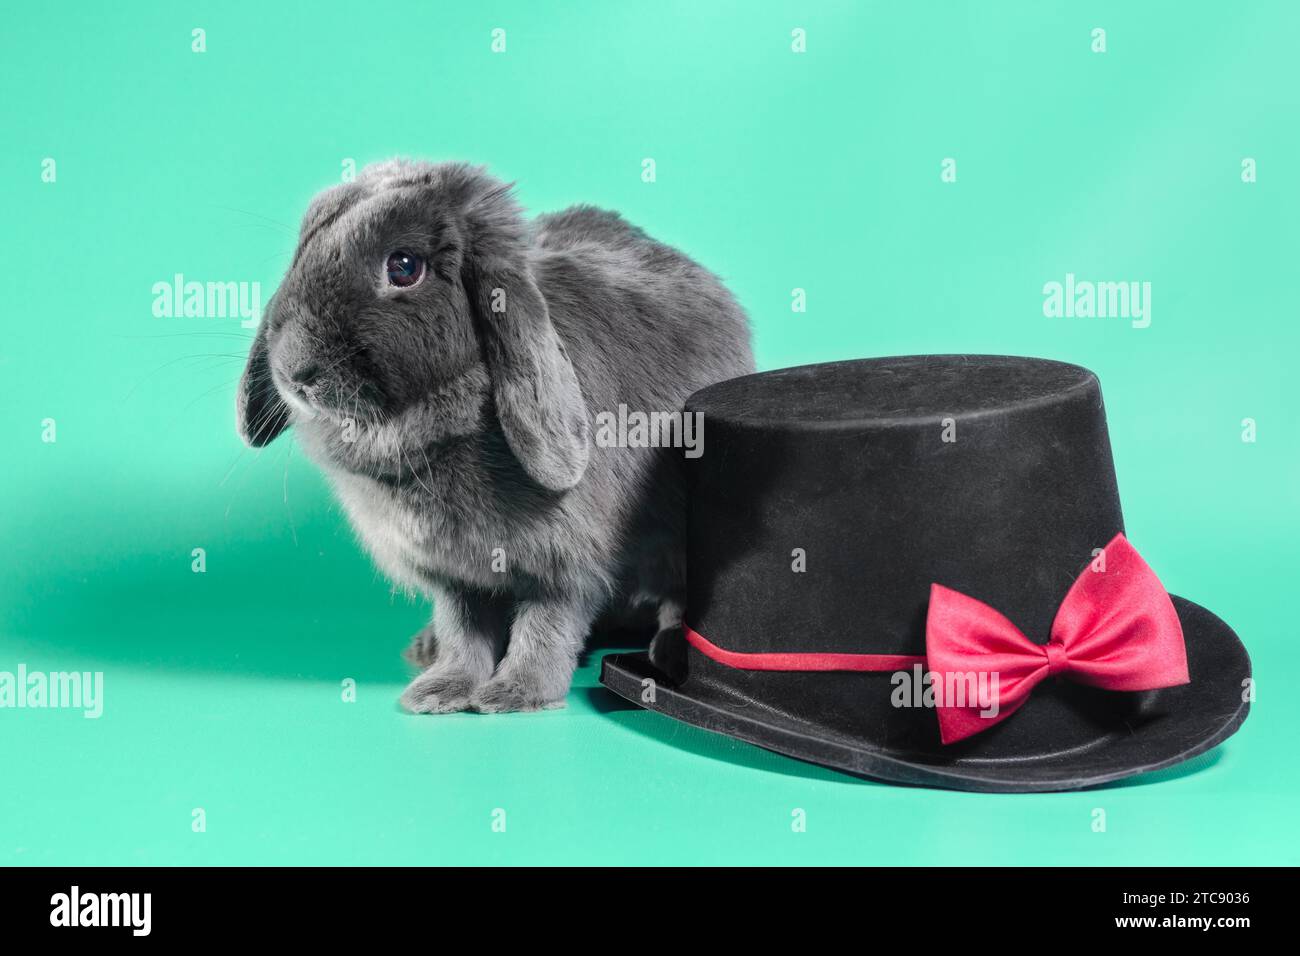 Gray lop-eared dwarf rabbit next to a black cylinder hat on a light green background Stock Photo